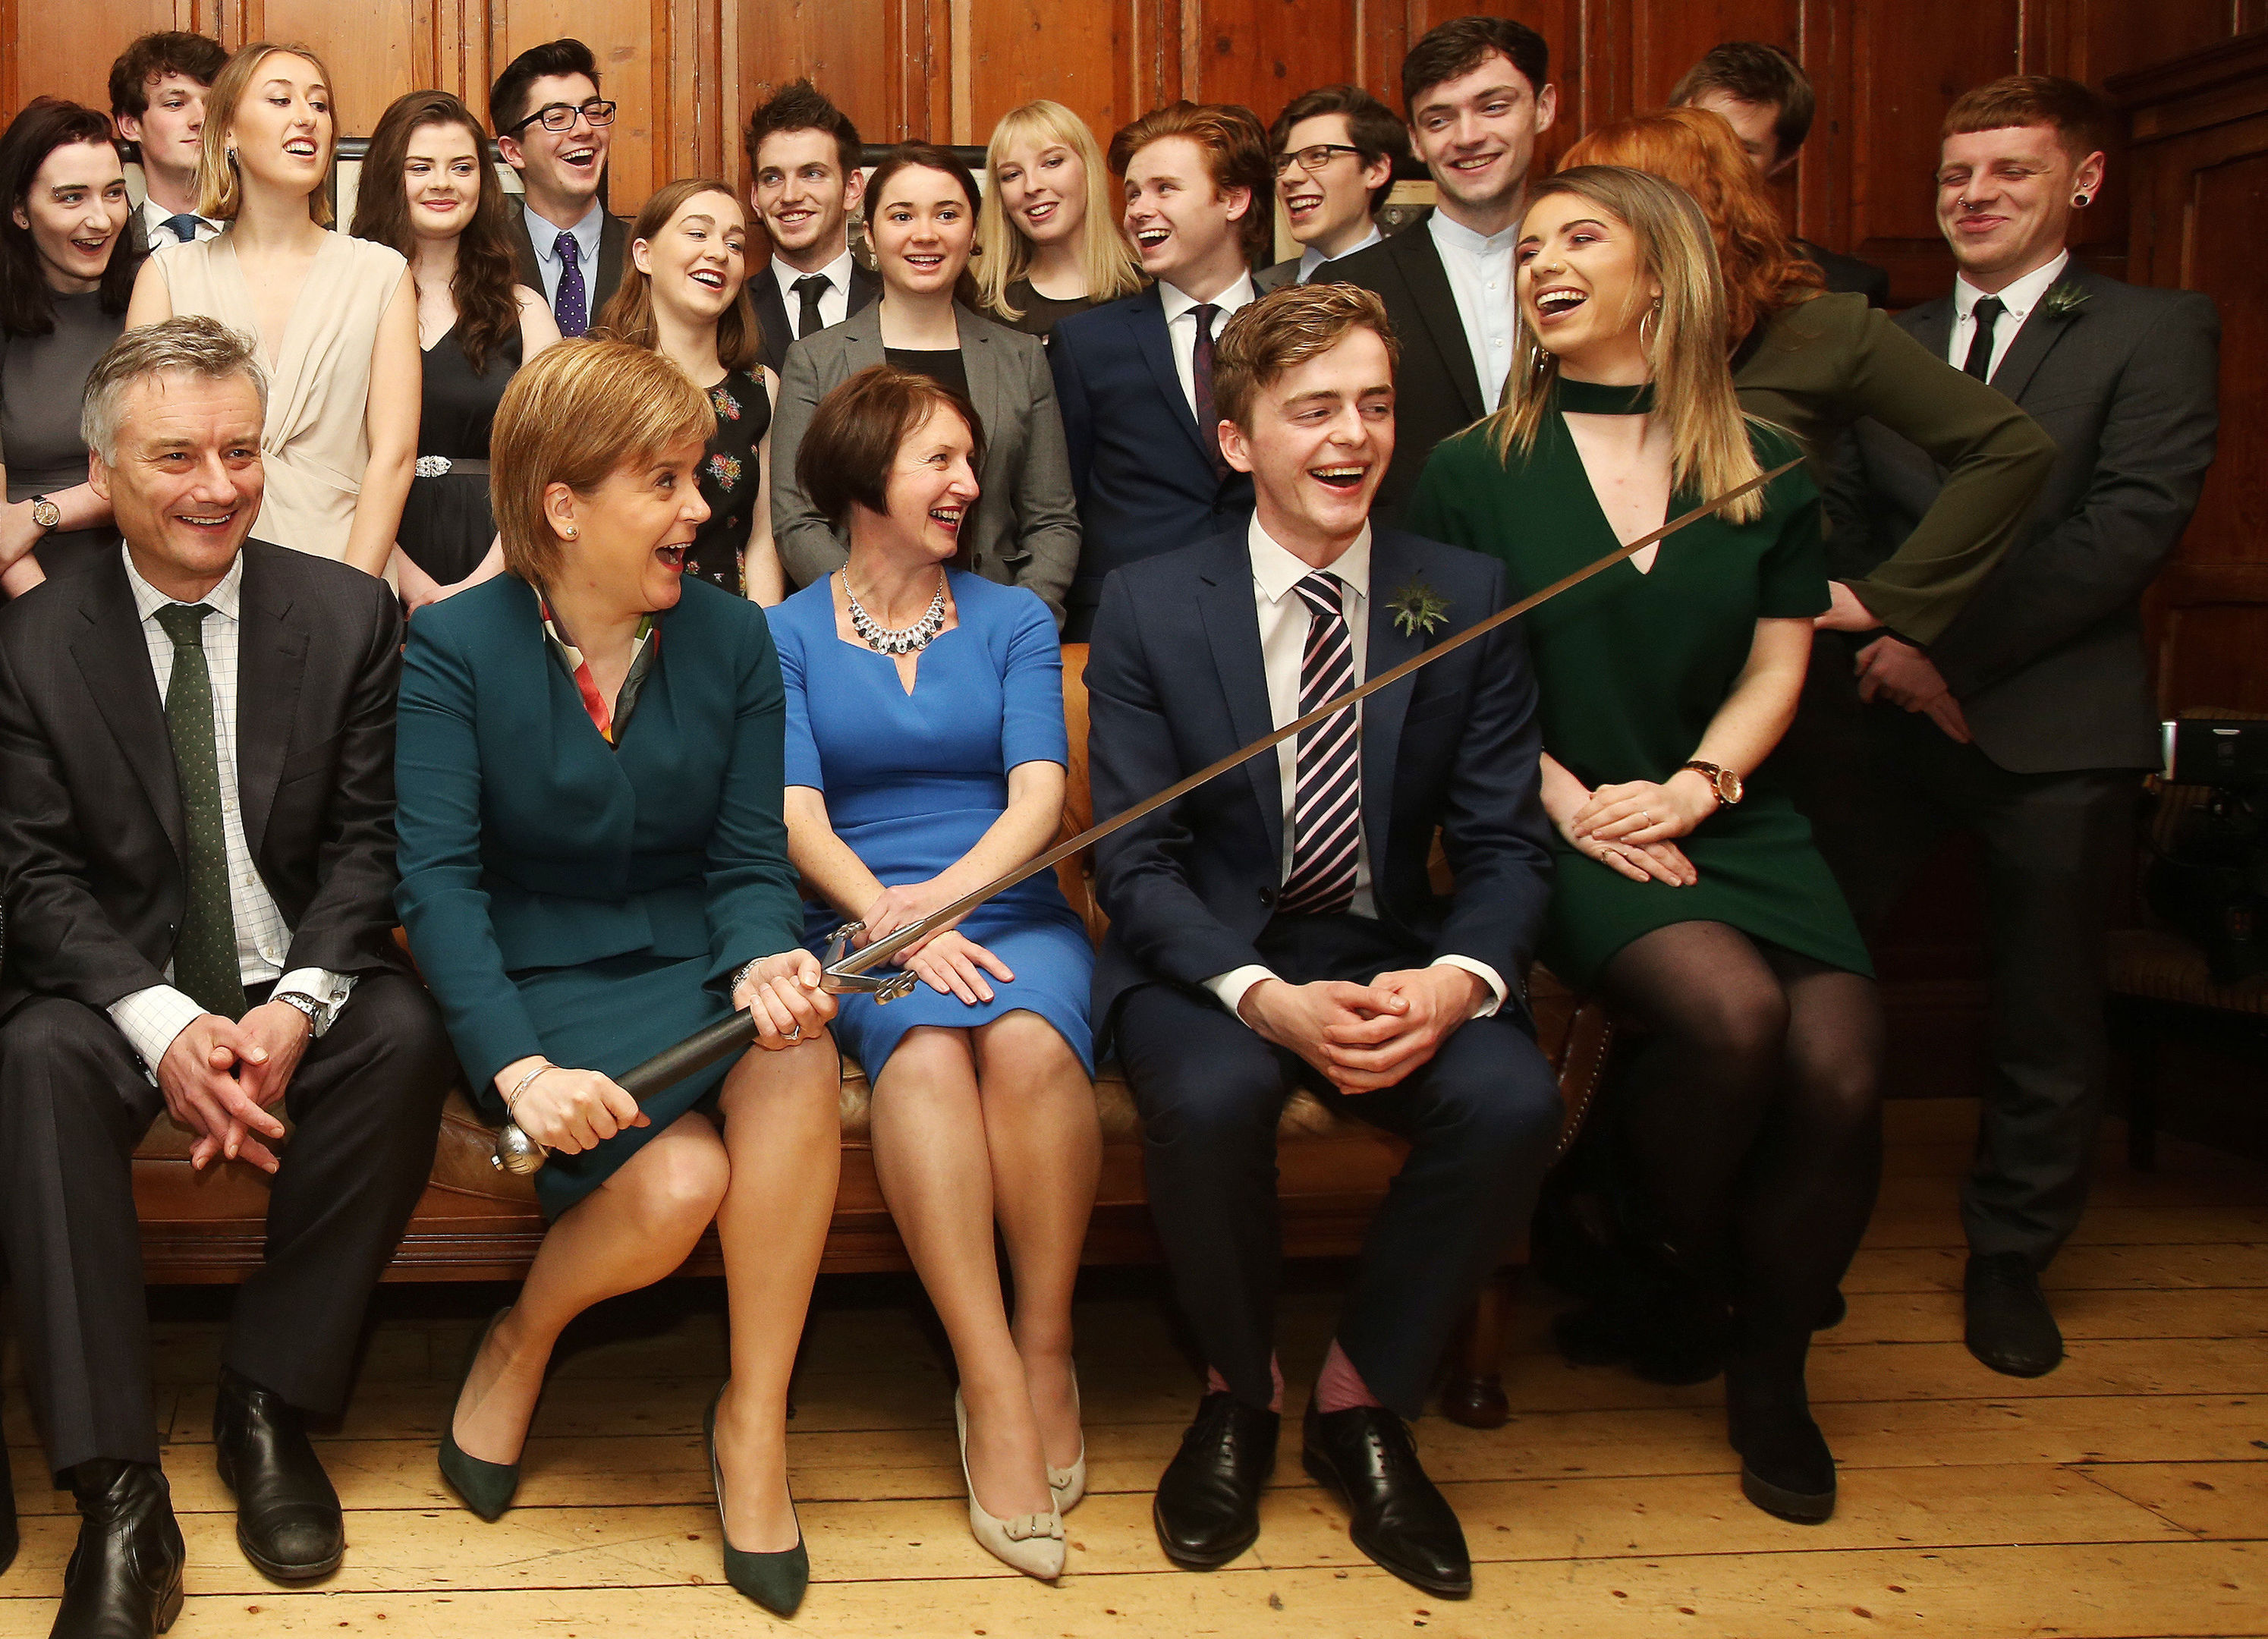 First Minister Nicola Sturgeon and the Provost of Trinity College Dublin, Patrick Prendergast (front left) are joined by 22 members of the Philosophical Society at Trinity College Dublin before she received an honorary patronage from the the college.